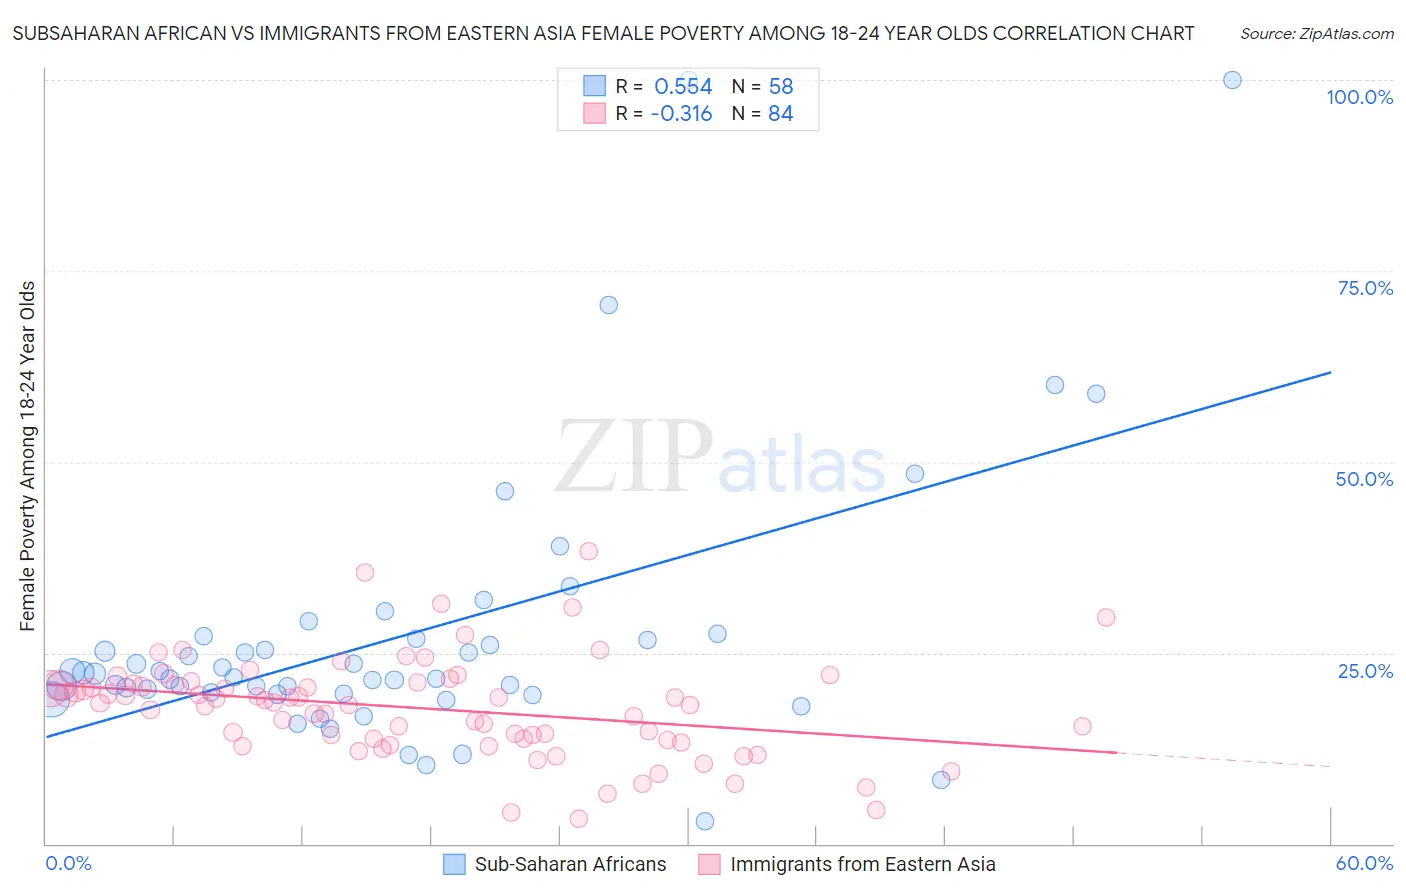 Subsaharan African vs Immigrants from Eastern Asia Female Poverty Among 18-24 Year Olds